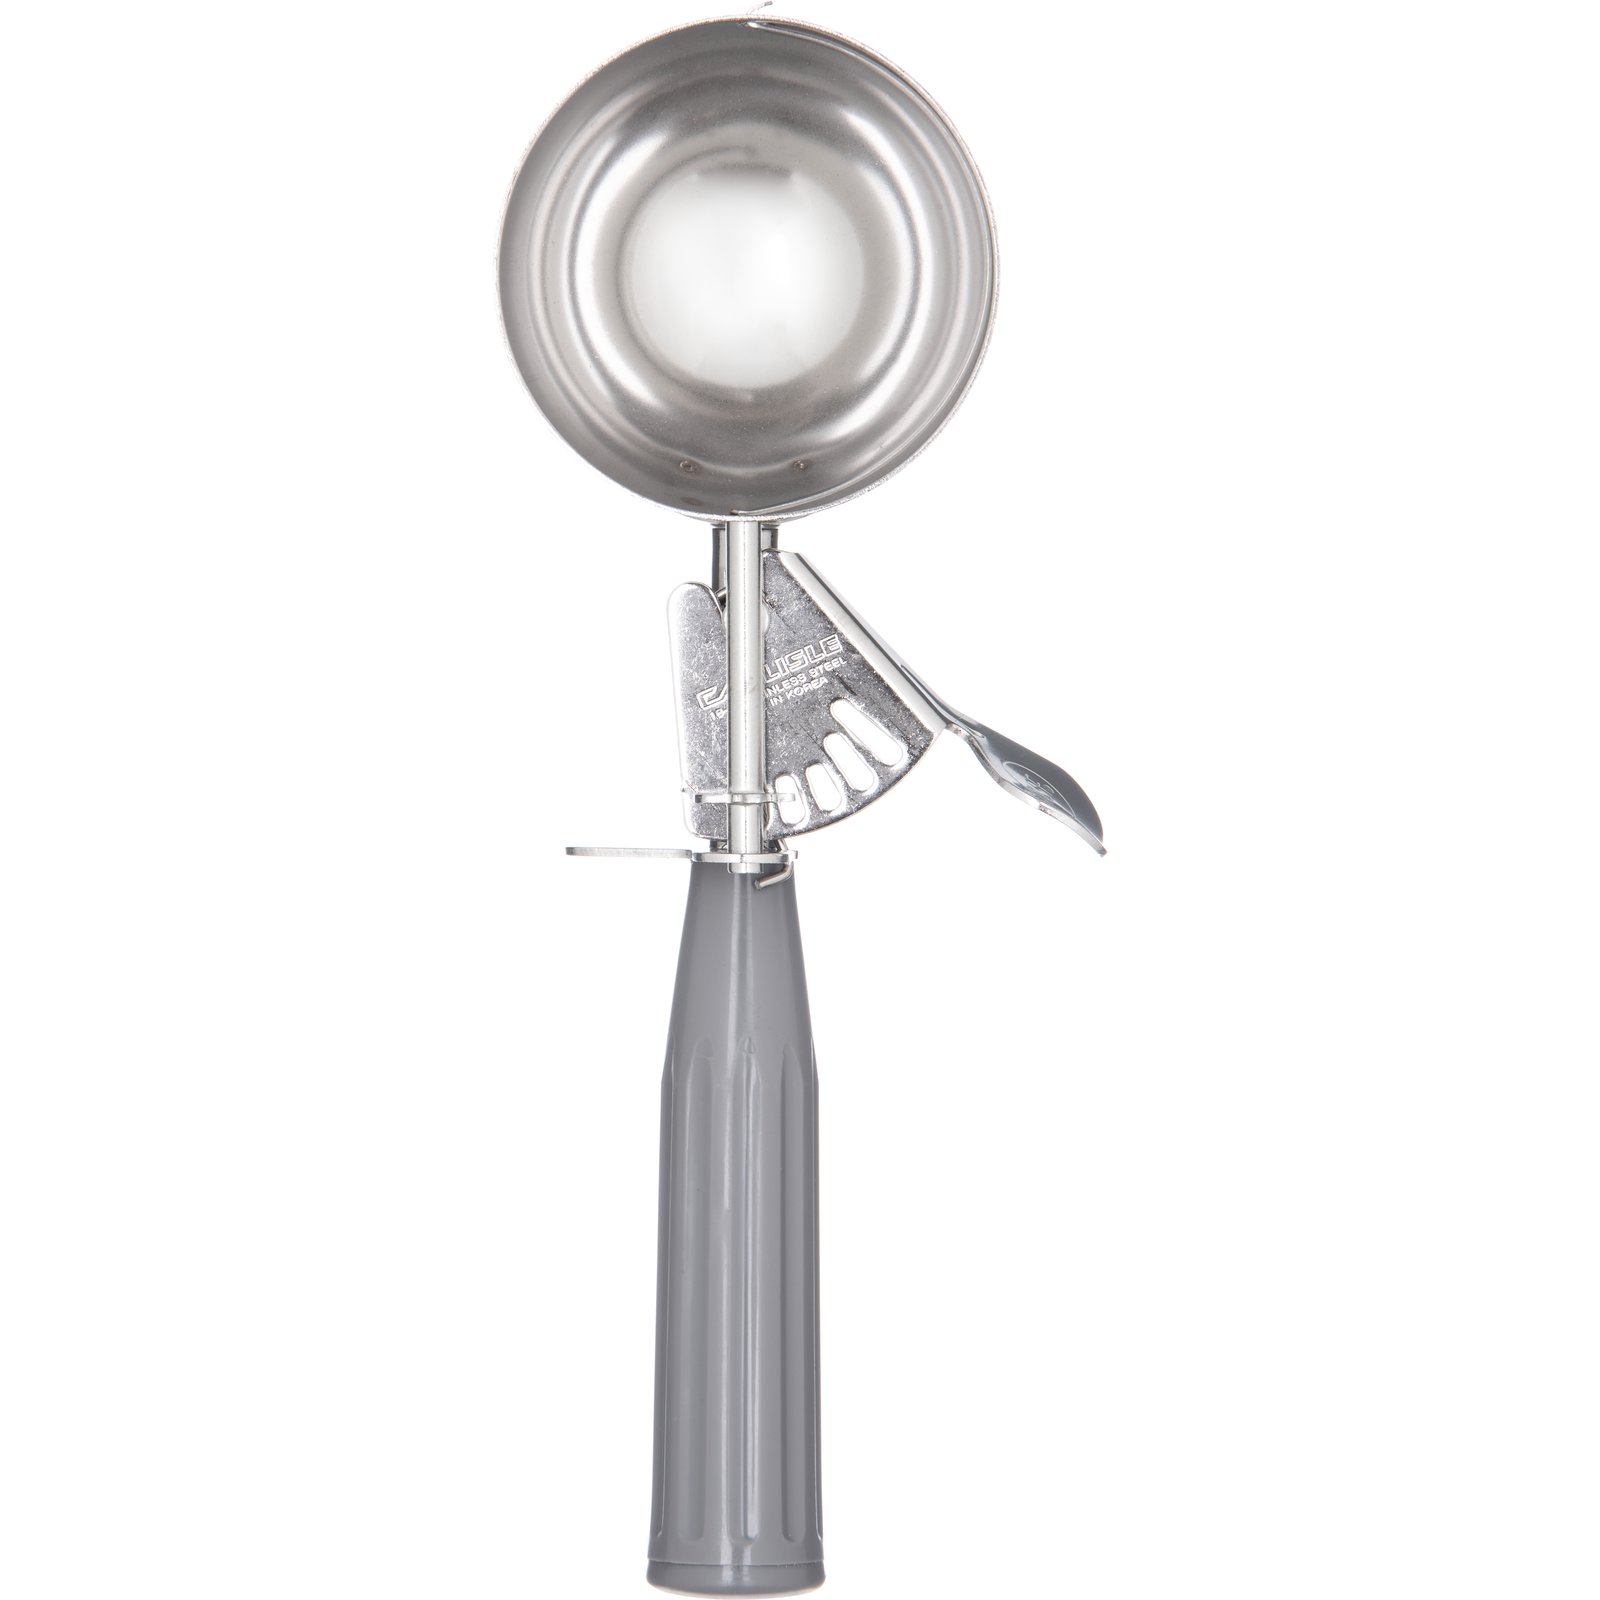 60300-6 - Stainless Steel Disher Scoop #6 Size 4.7 oz - White